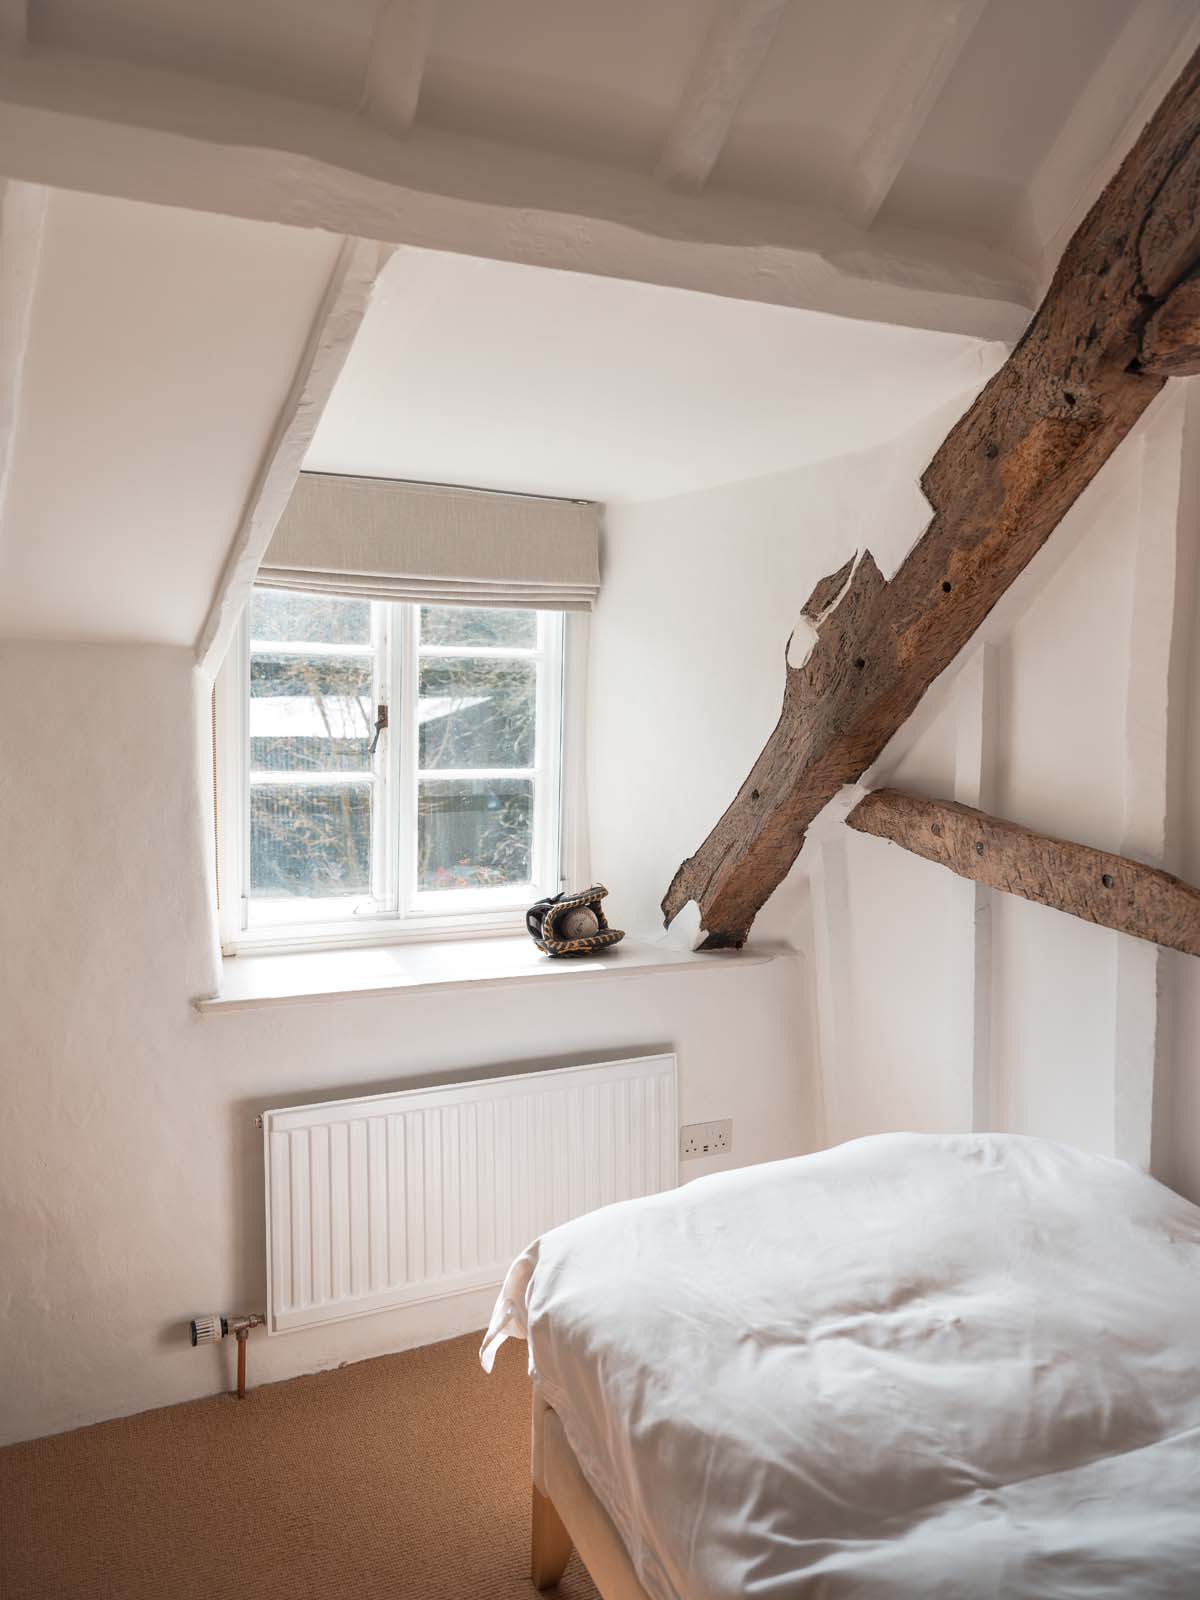 View from one of the bedrooms and the cottage wooden beams